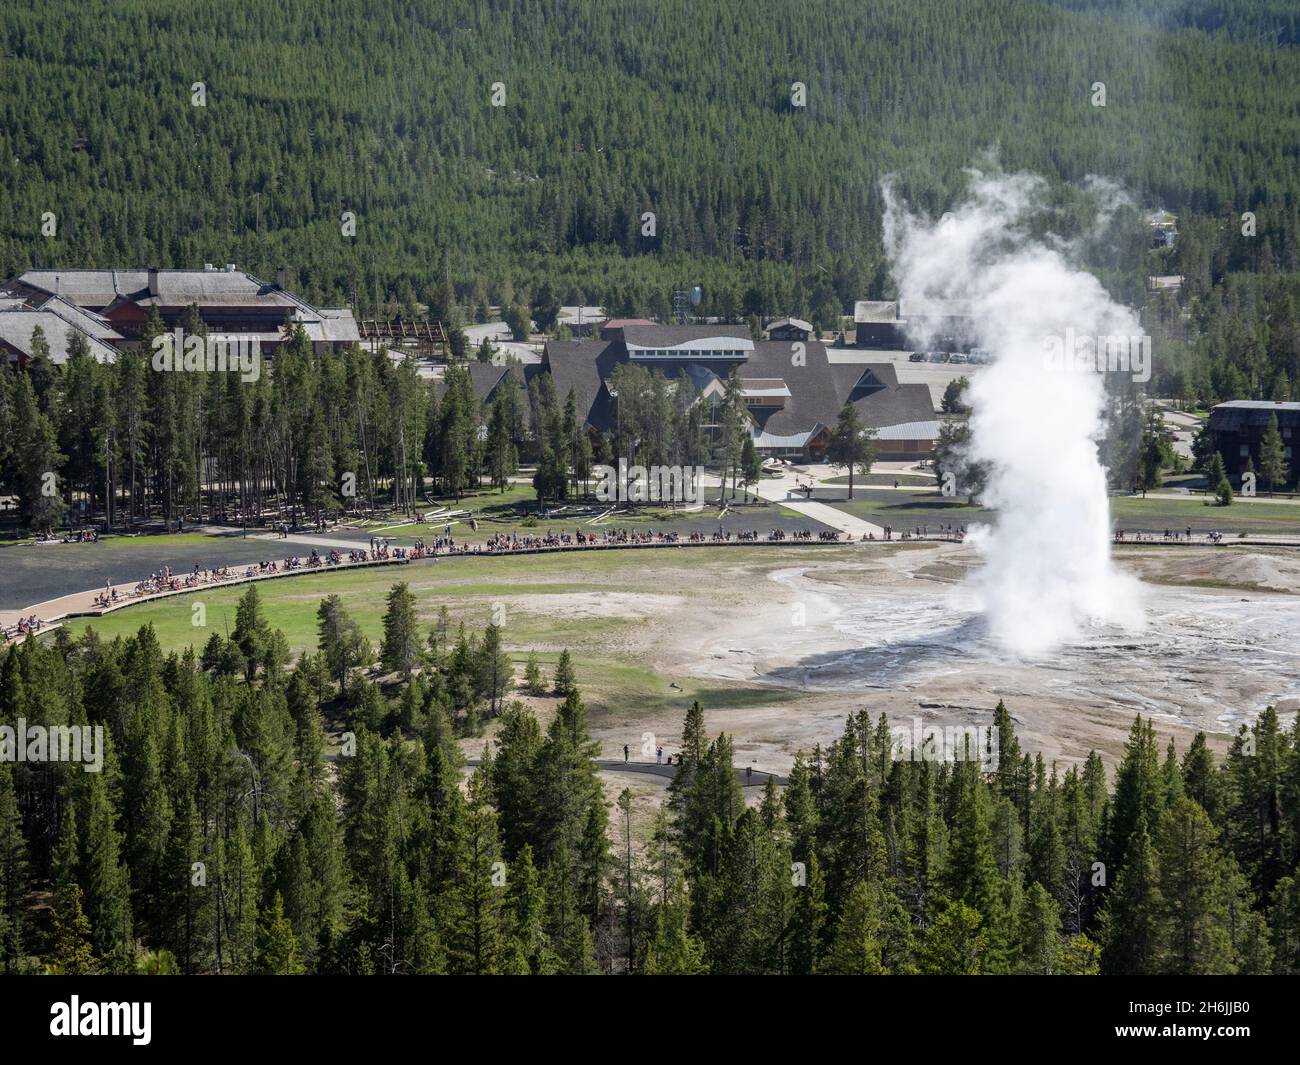 The cone geyser called Old Faithful erupting, Yellowstone National Park, UNESCO World Heritage Site, Wyoming, United States of America, North America Stock Photo